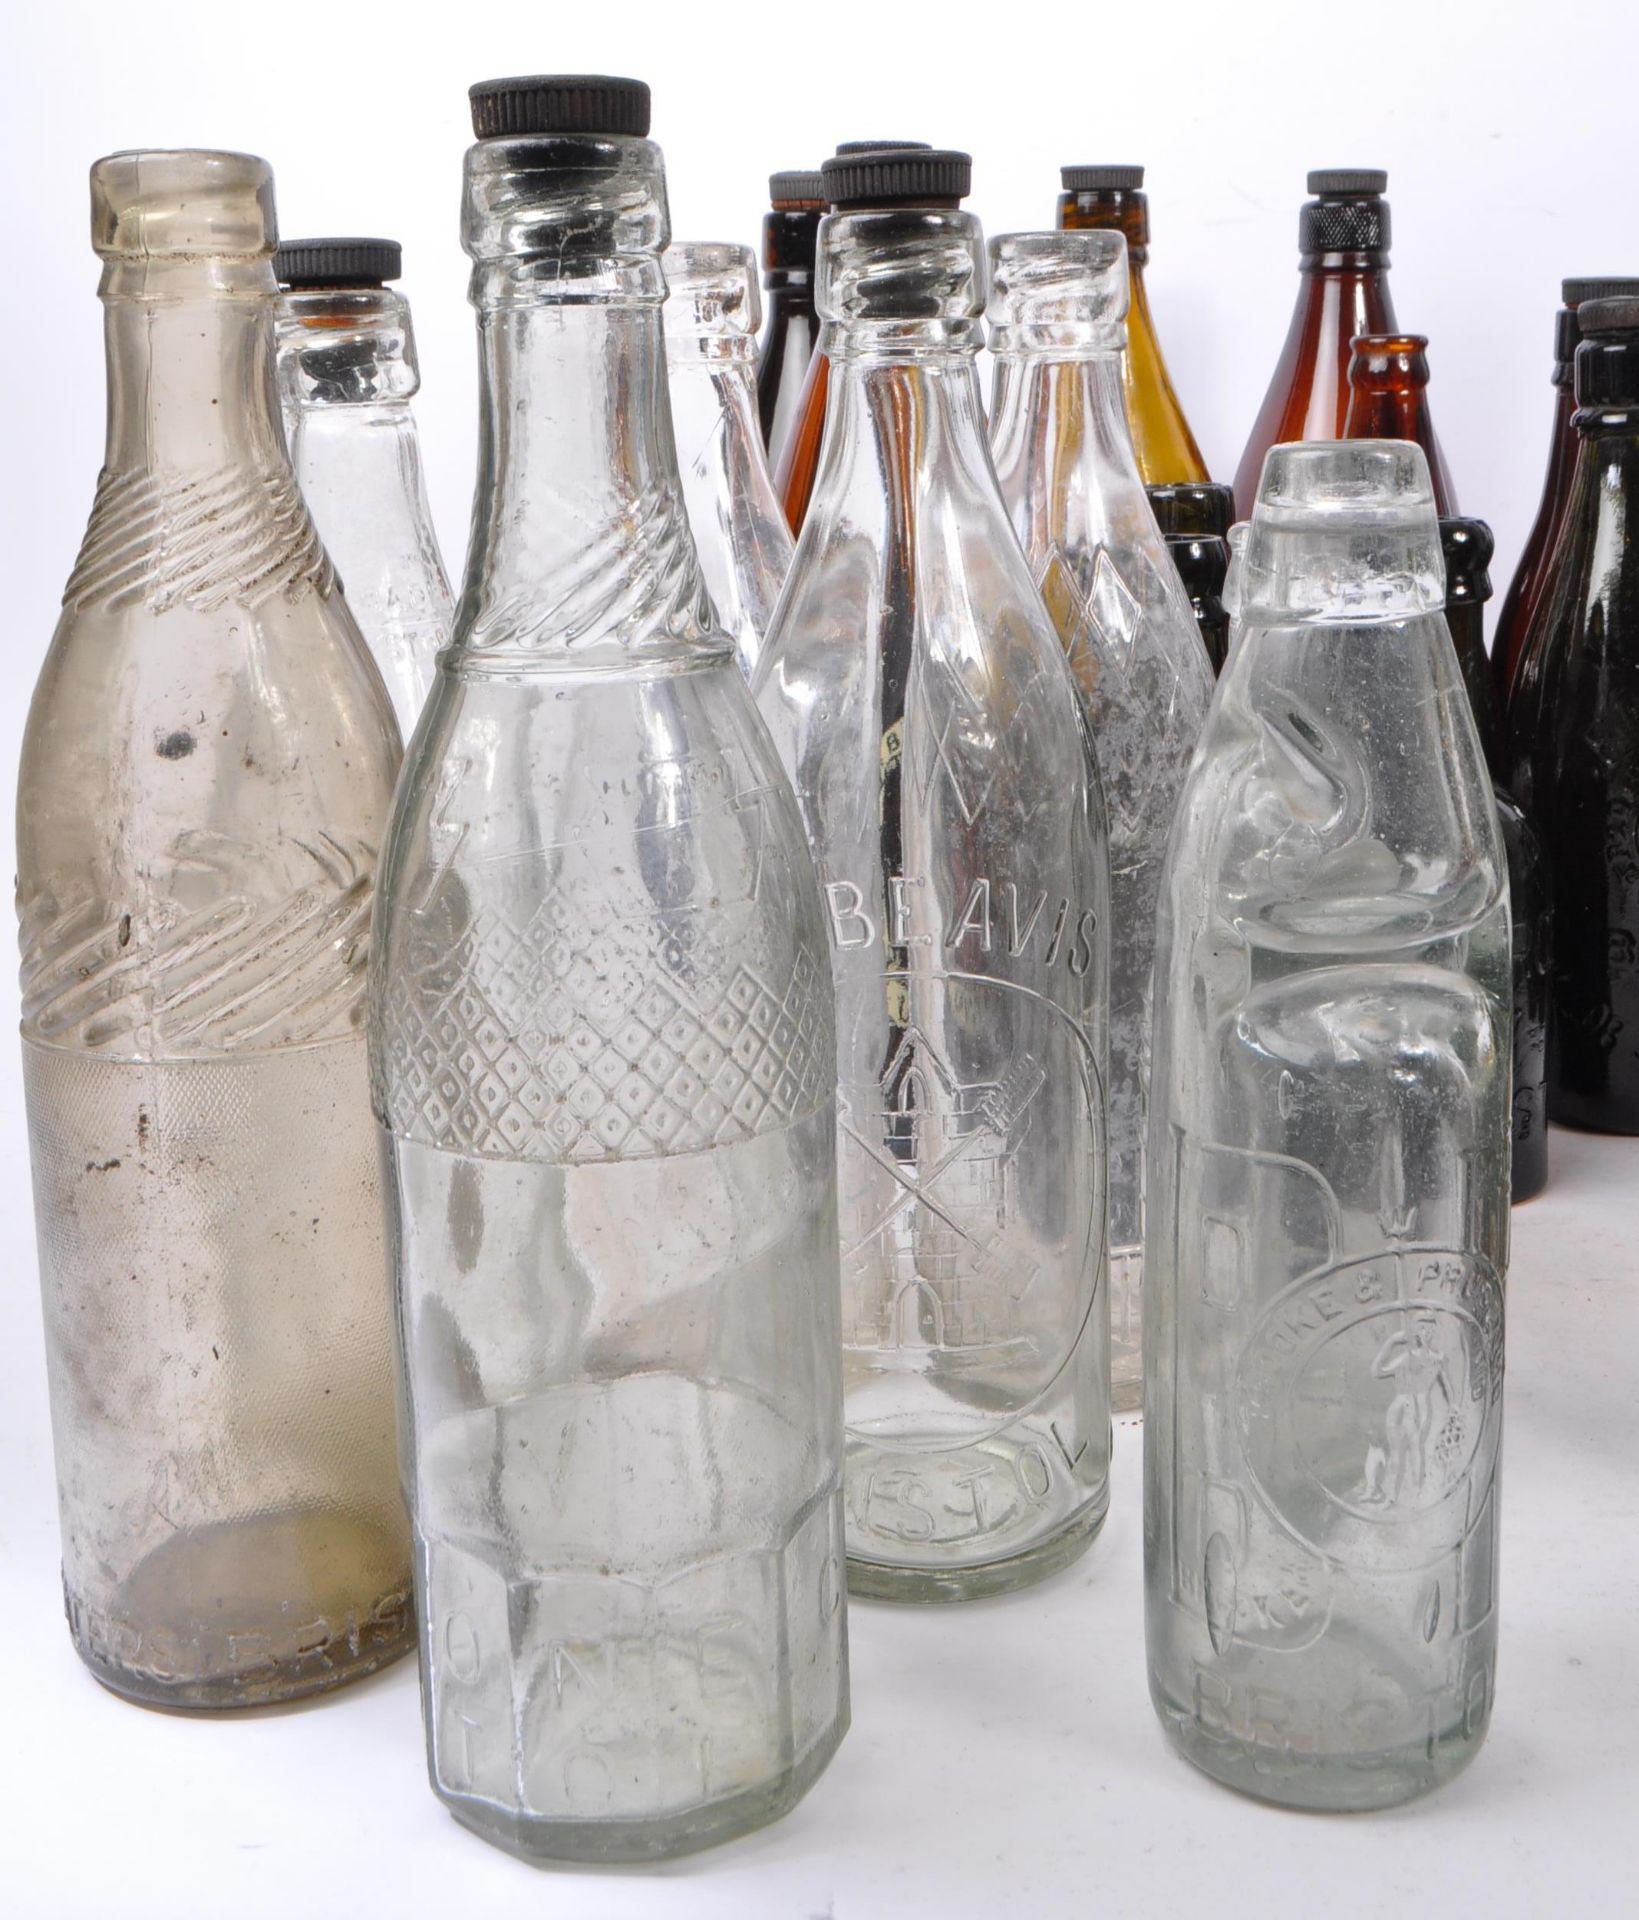 LARGE COLLECTION OF BRISTOL BREWERY GLASS BOTTLES - Image 3 of 6